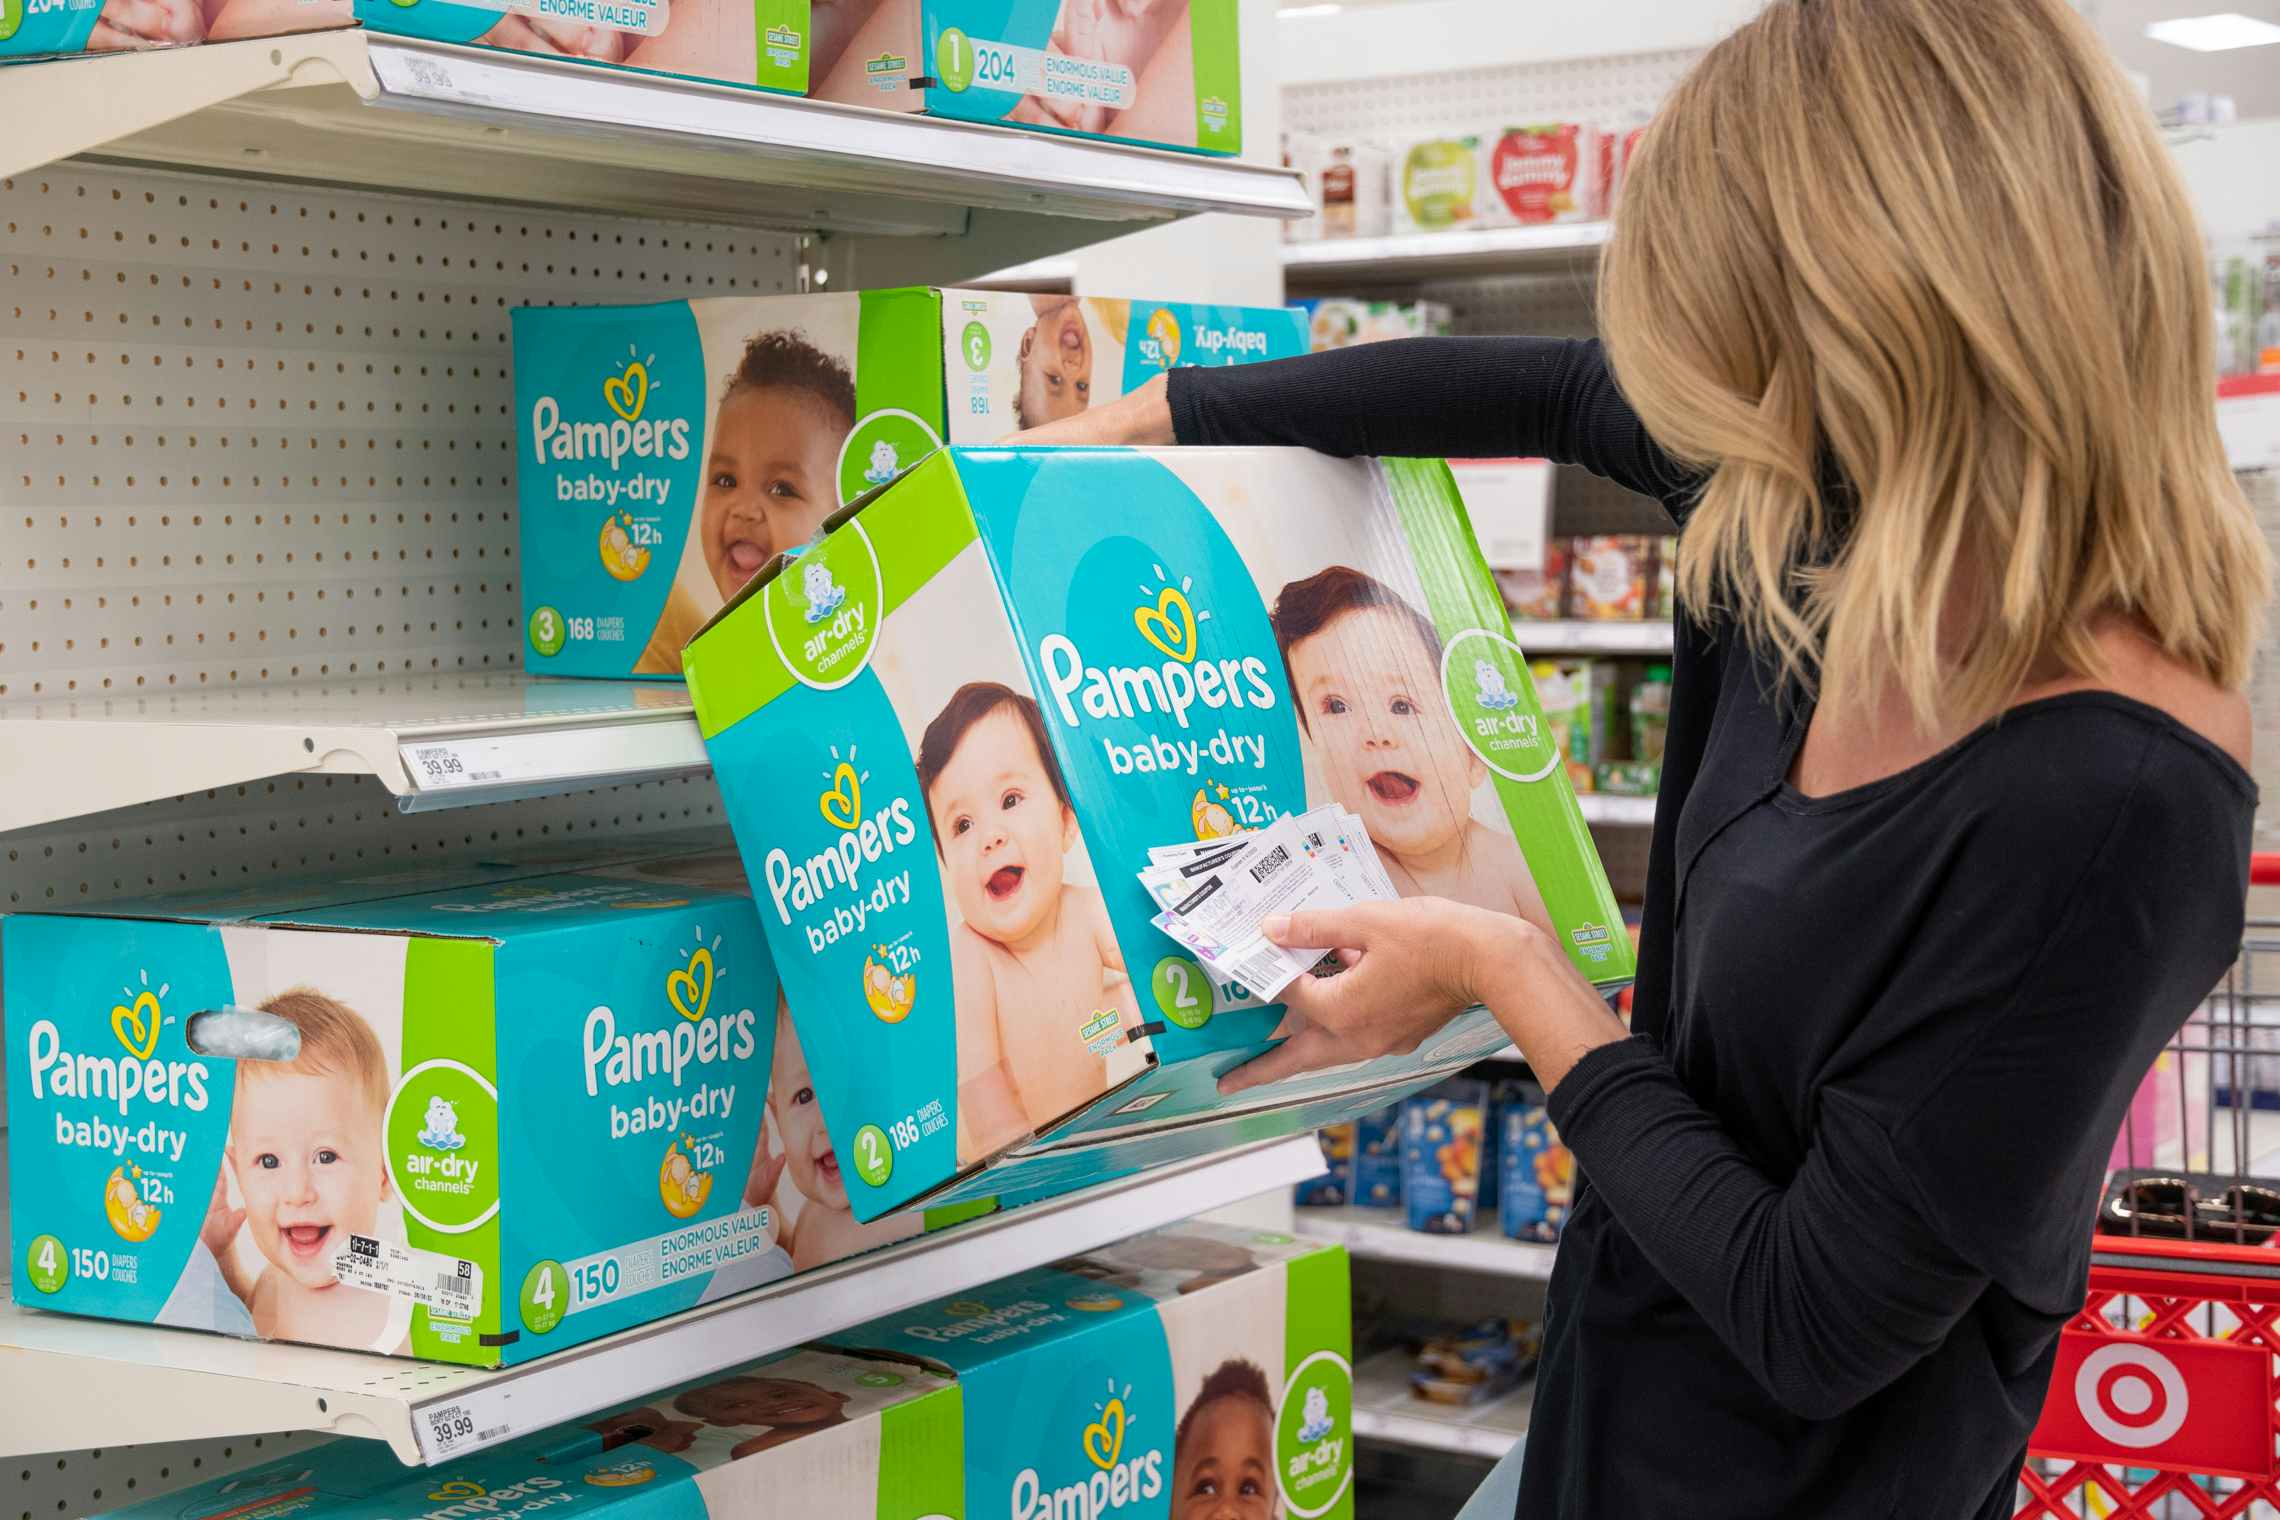 A woman shopping for Pampers diapers with coupons in Target.